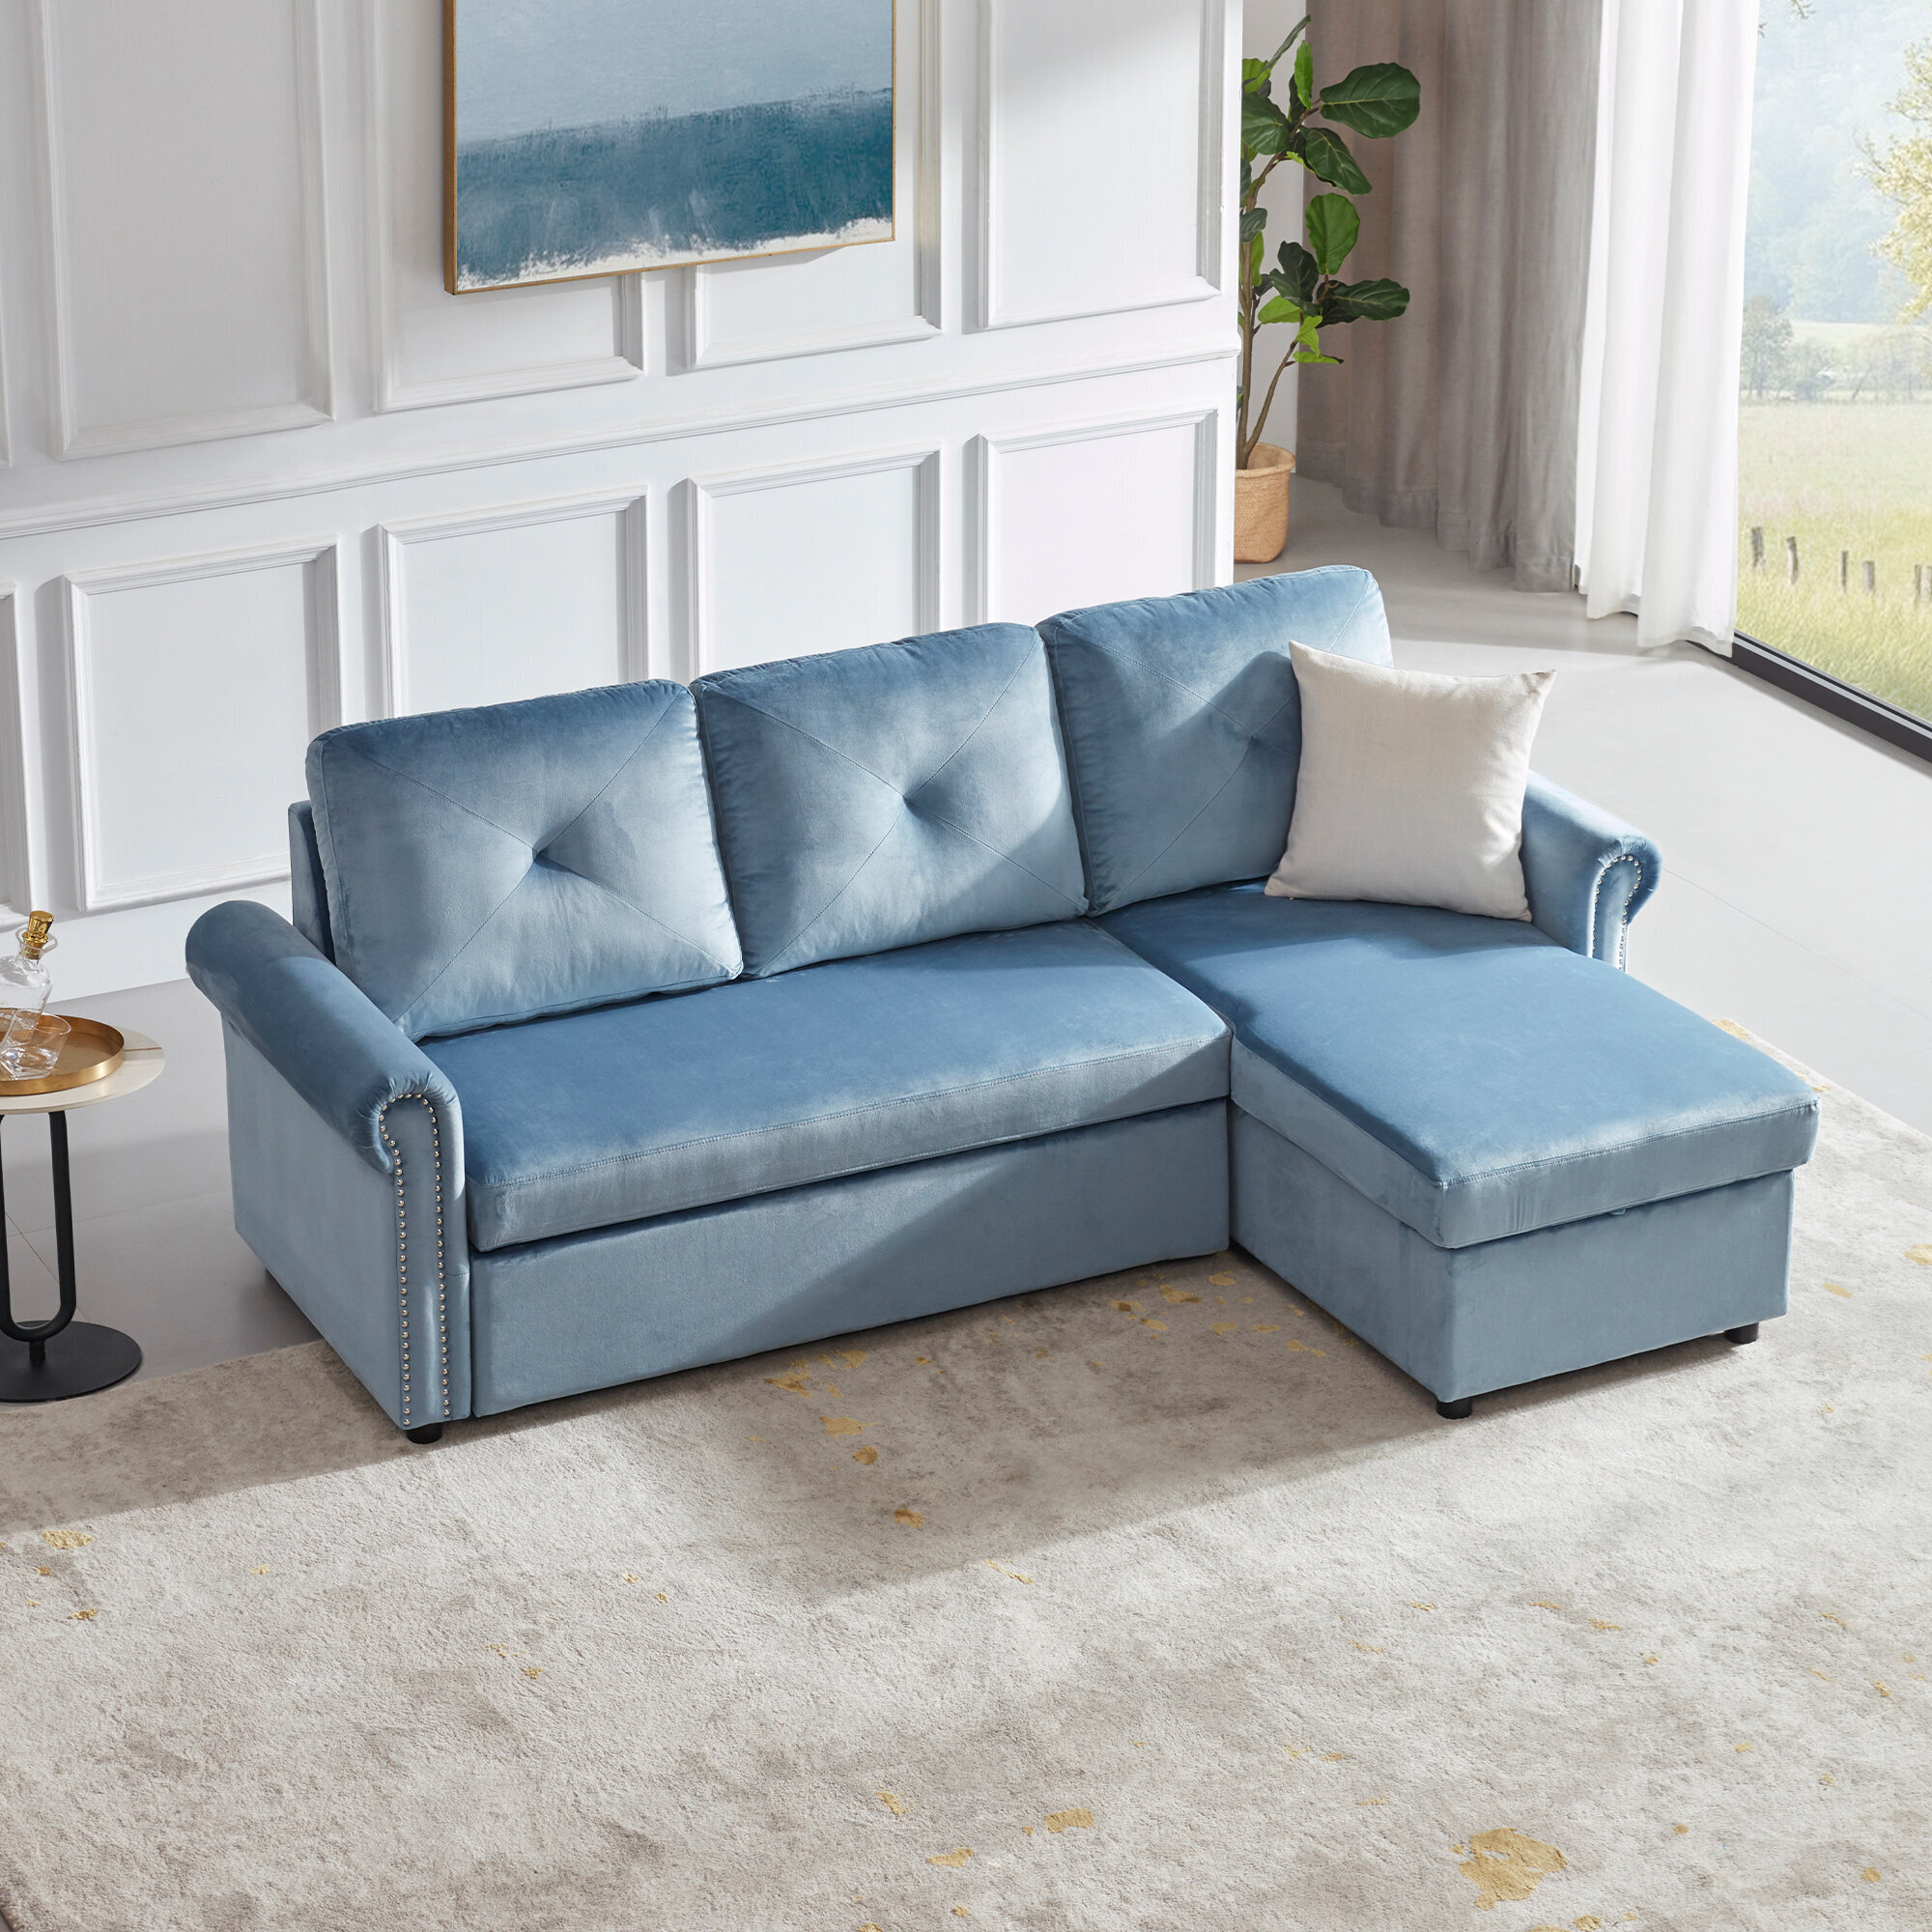 Plush, blue, traditional very small corner sectional 